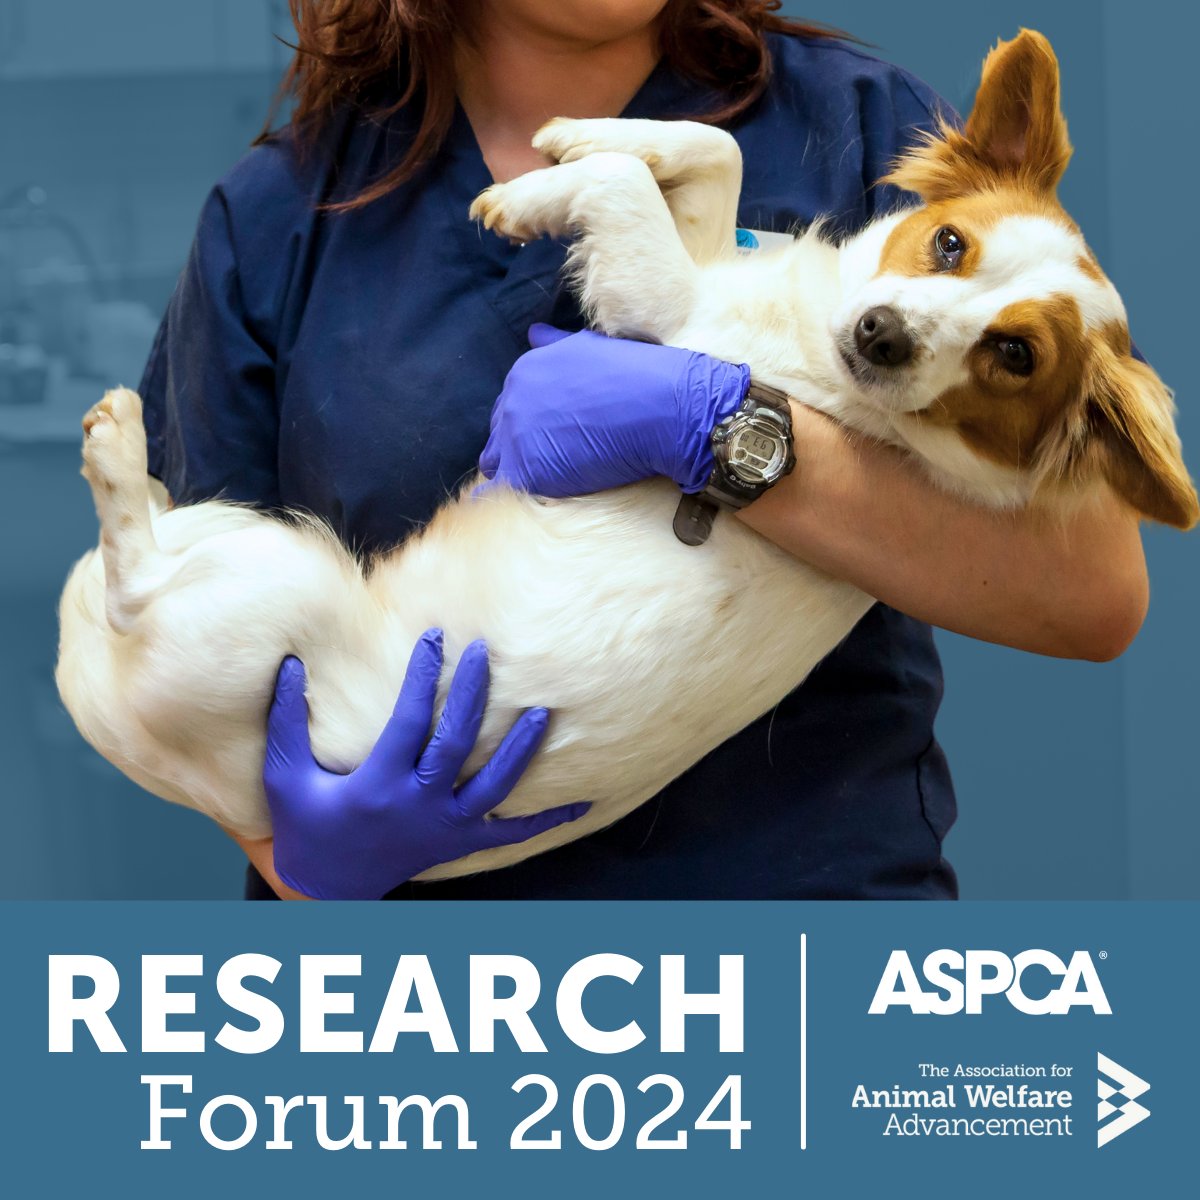 Are you an #animalwelfare professional with research to share? 💡 You are invited to present at the 2024 @ASPCA-AWAA Research Forum. We are excited to welcome speakers at this unique event. #CareerOpportunity #VetMed #Apply to present by June 30. 👇 airtable.com/appBjr3SoRaDhz…